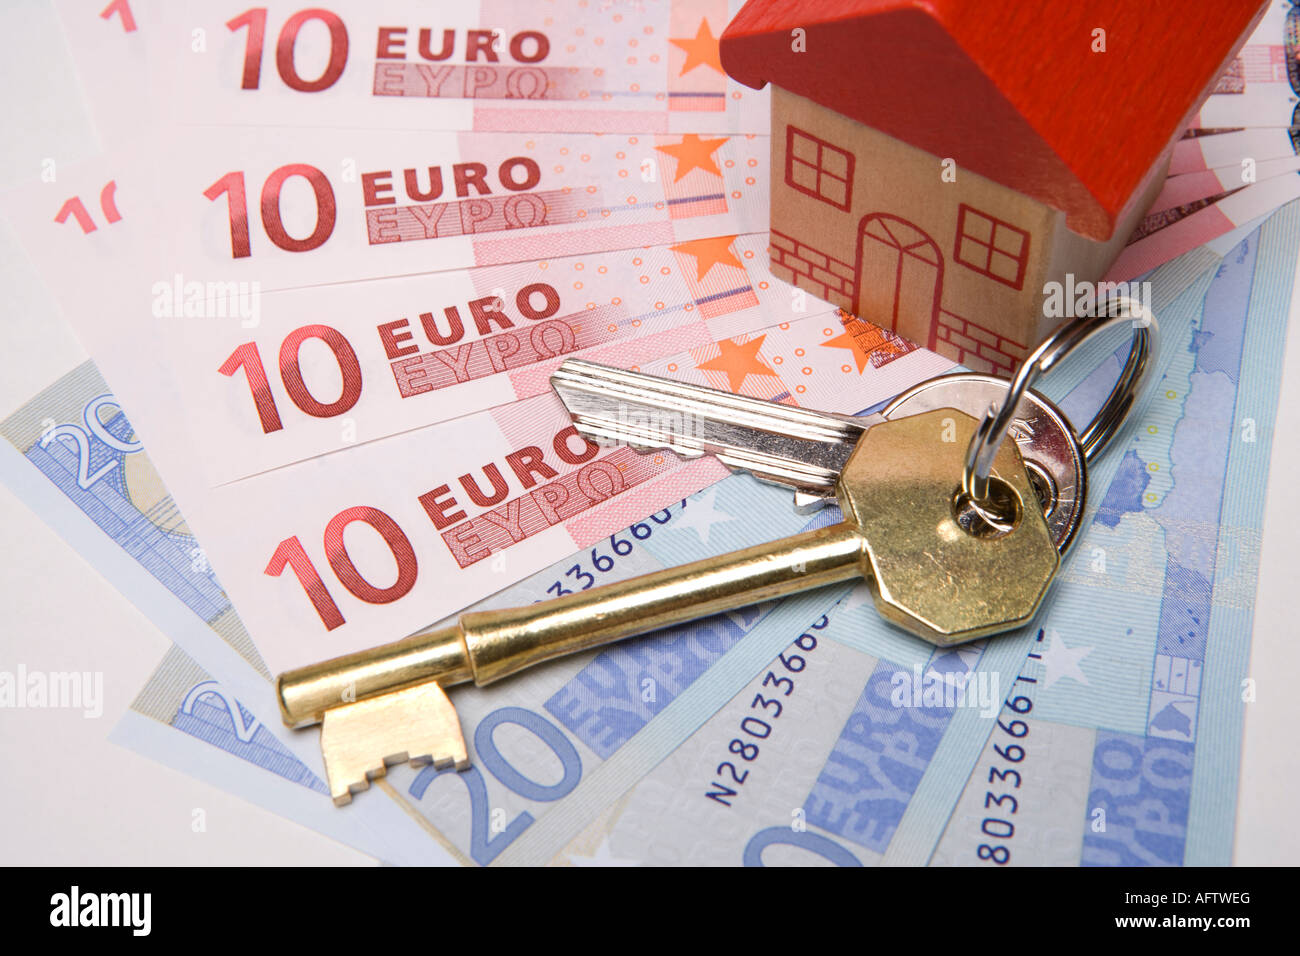 Keys to new house Buying or investing in property or house overseas or abroad with euros Stock Photo